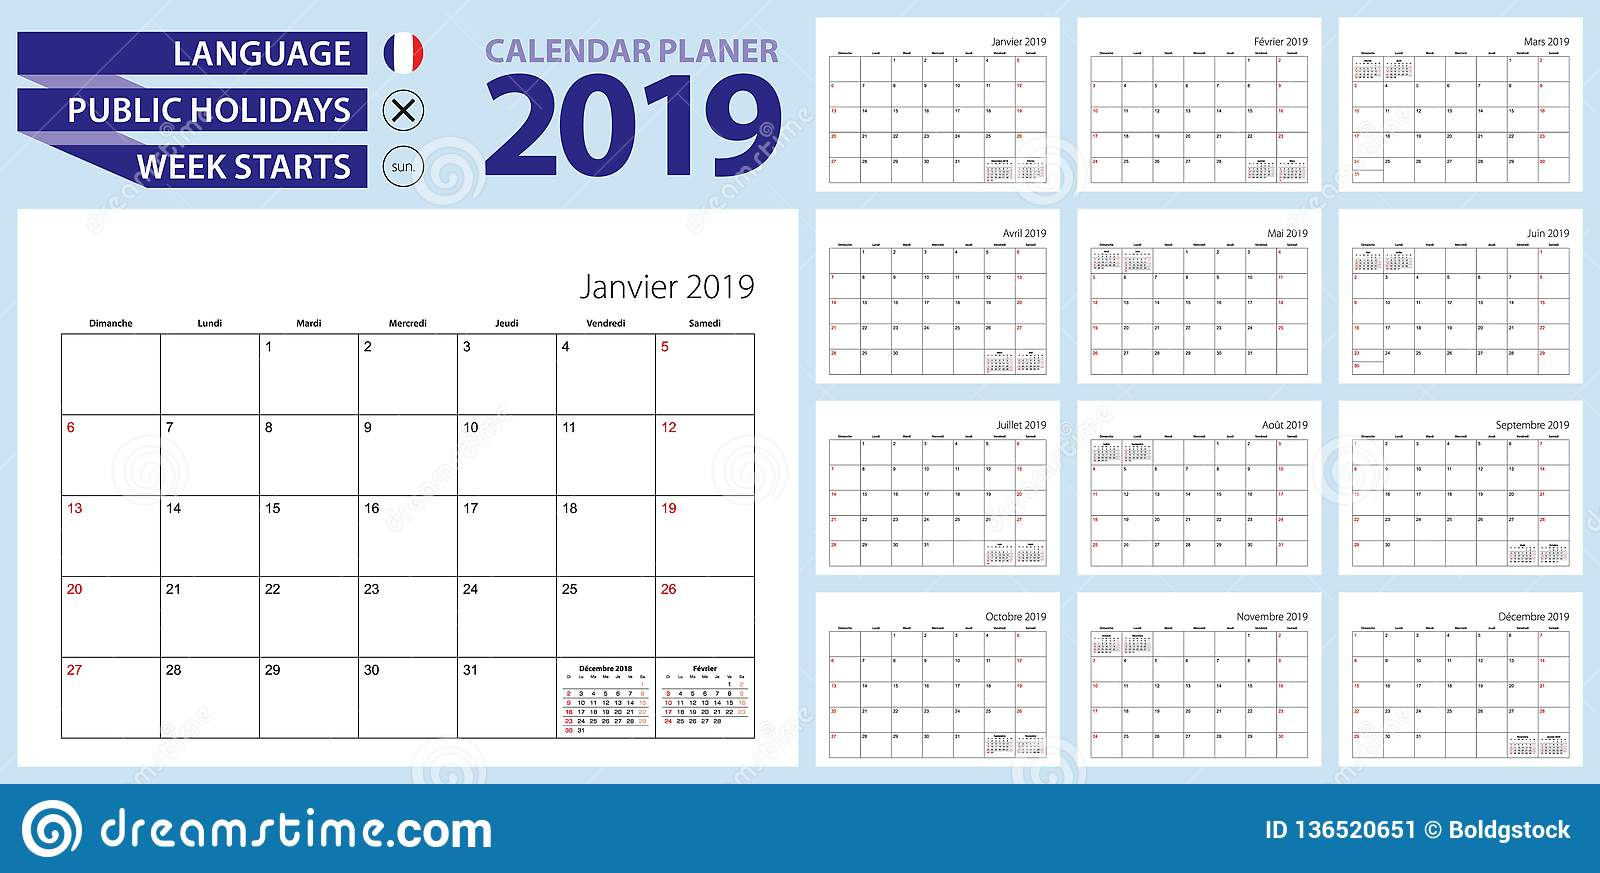 french calendar planner for 2019 french language week